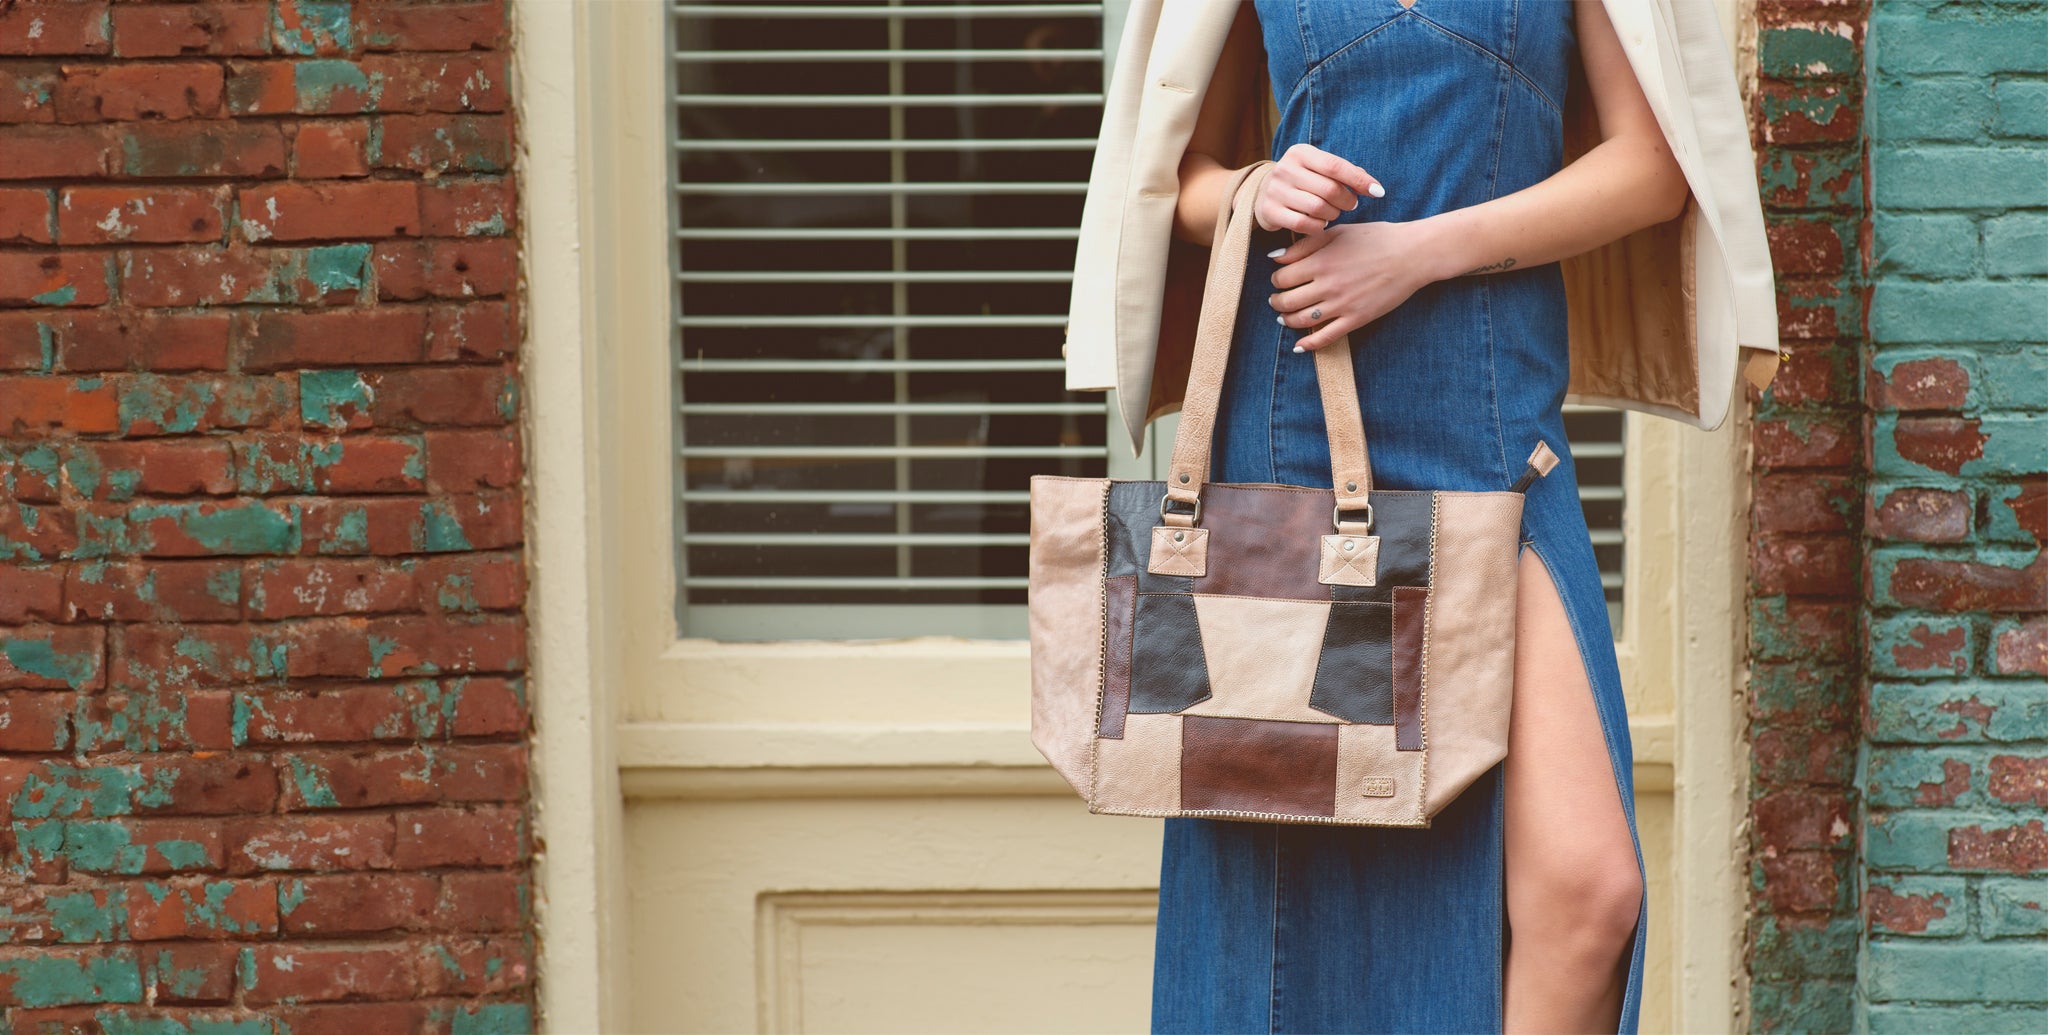 Woman in a denim dress holding a patchwork tote bag, standing against a brick wall background.